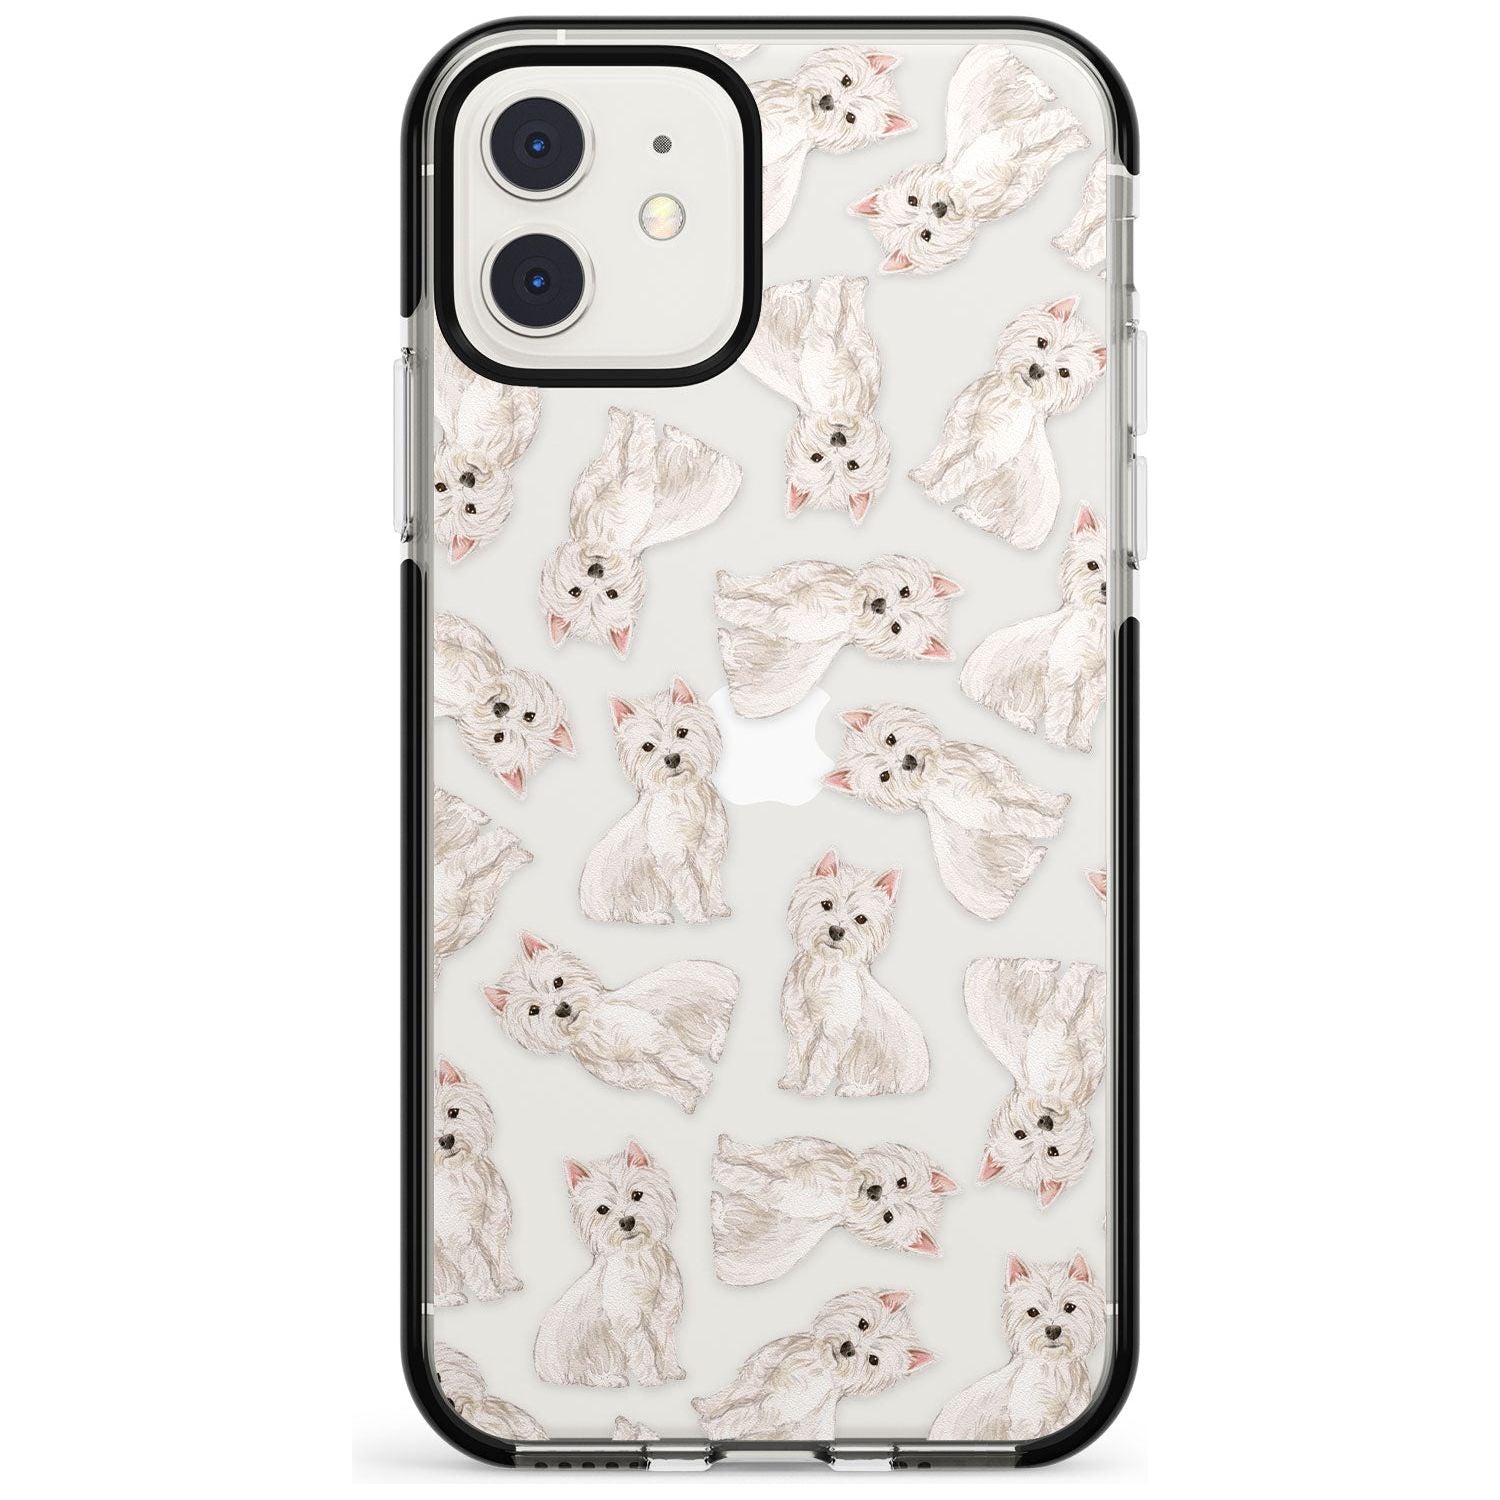 Westie Watercolour Dog Pattern Black Impact Phone Case for iPhone 11